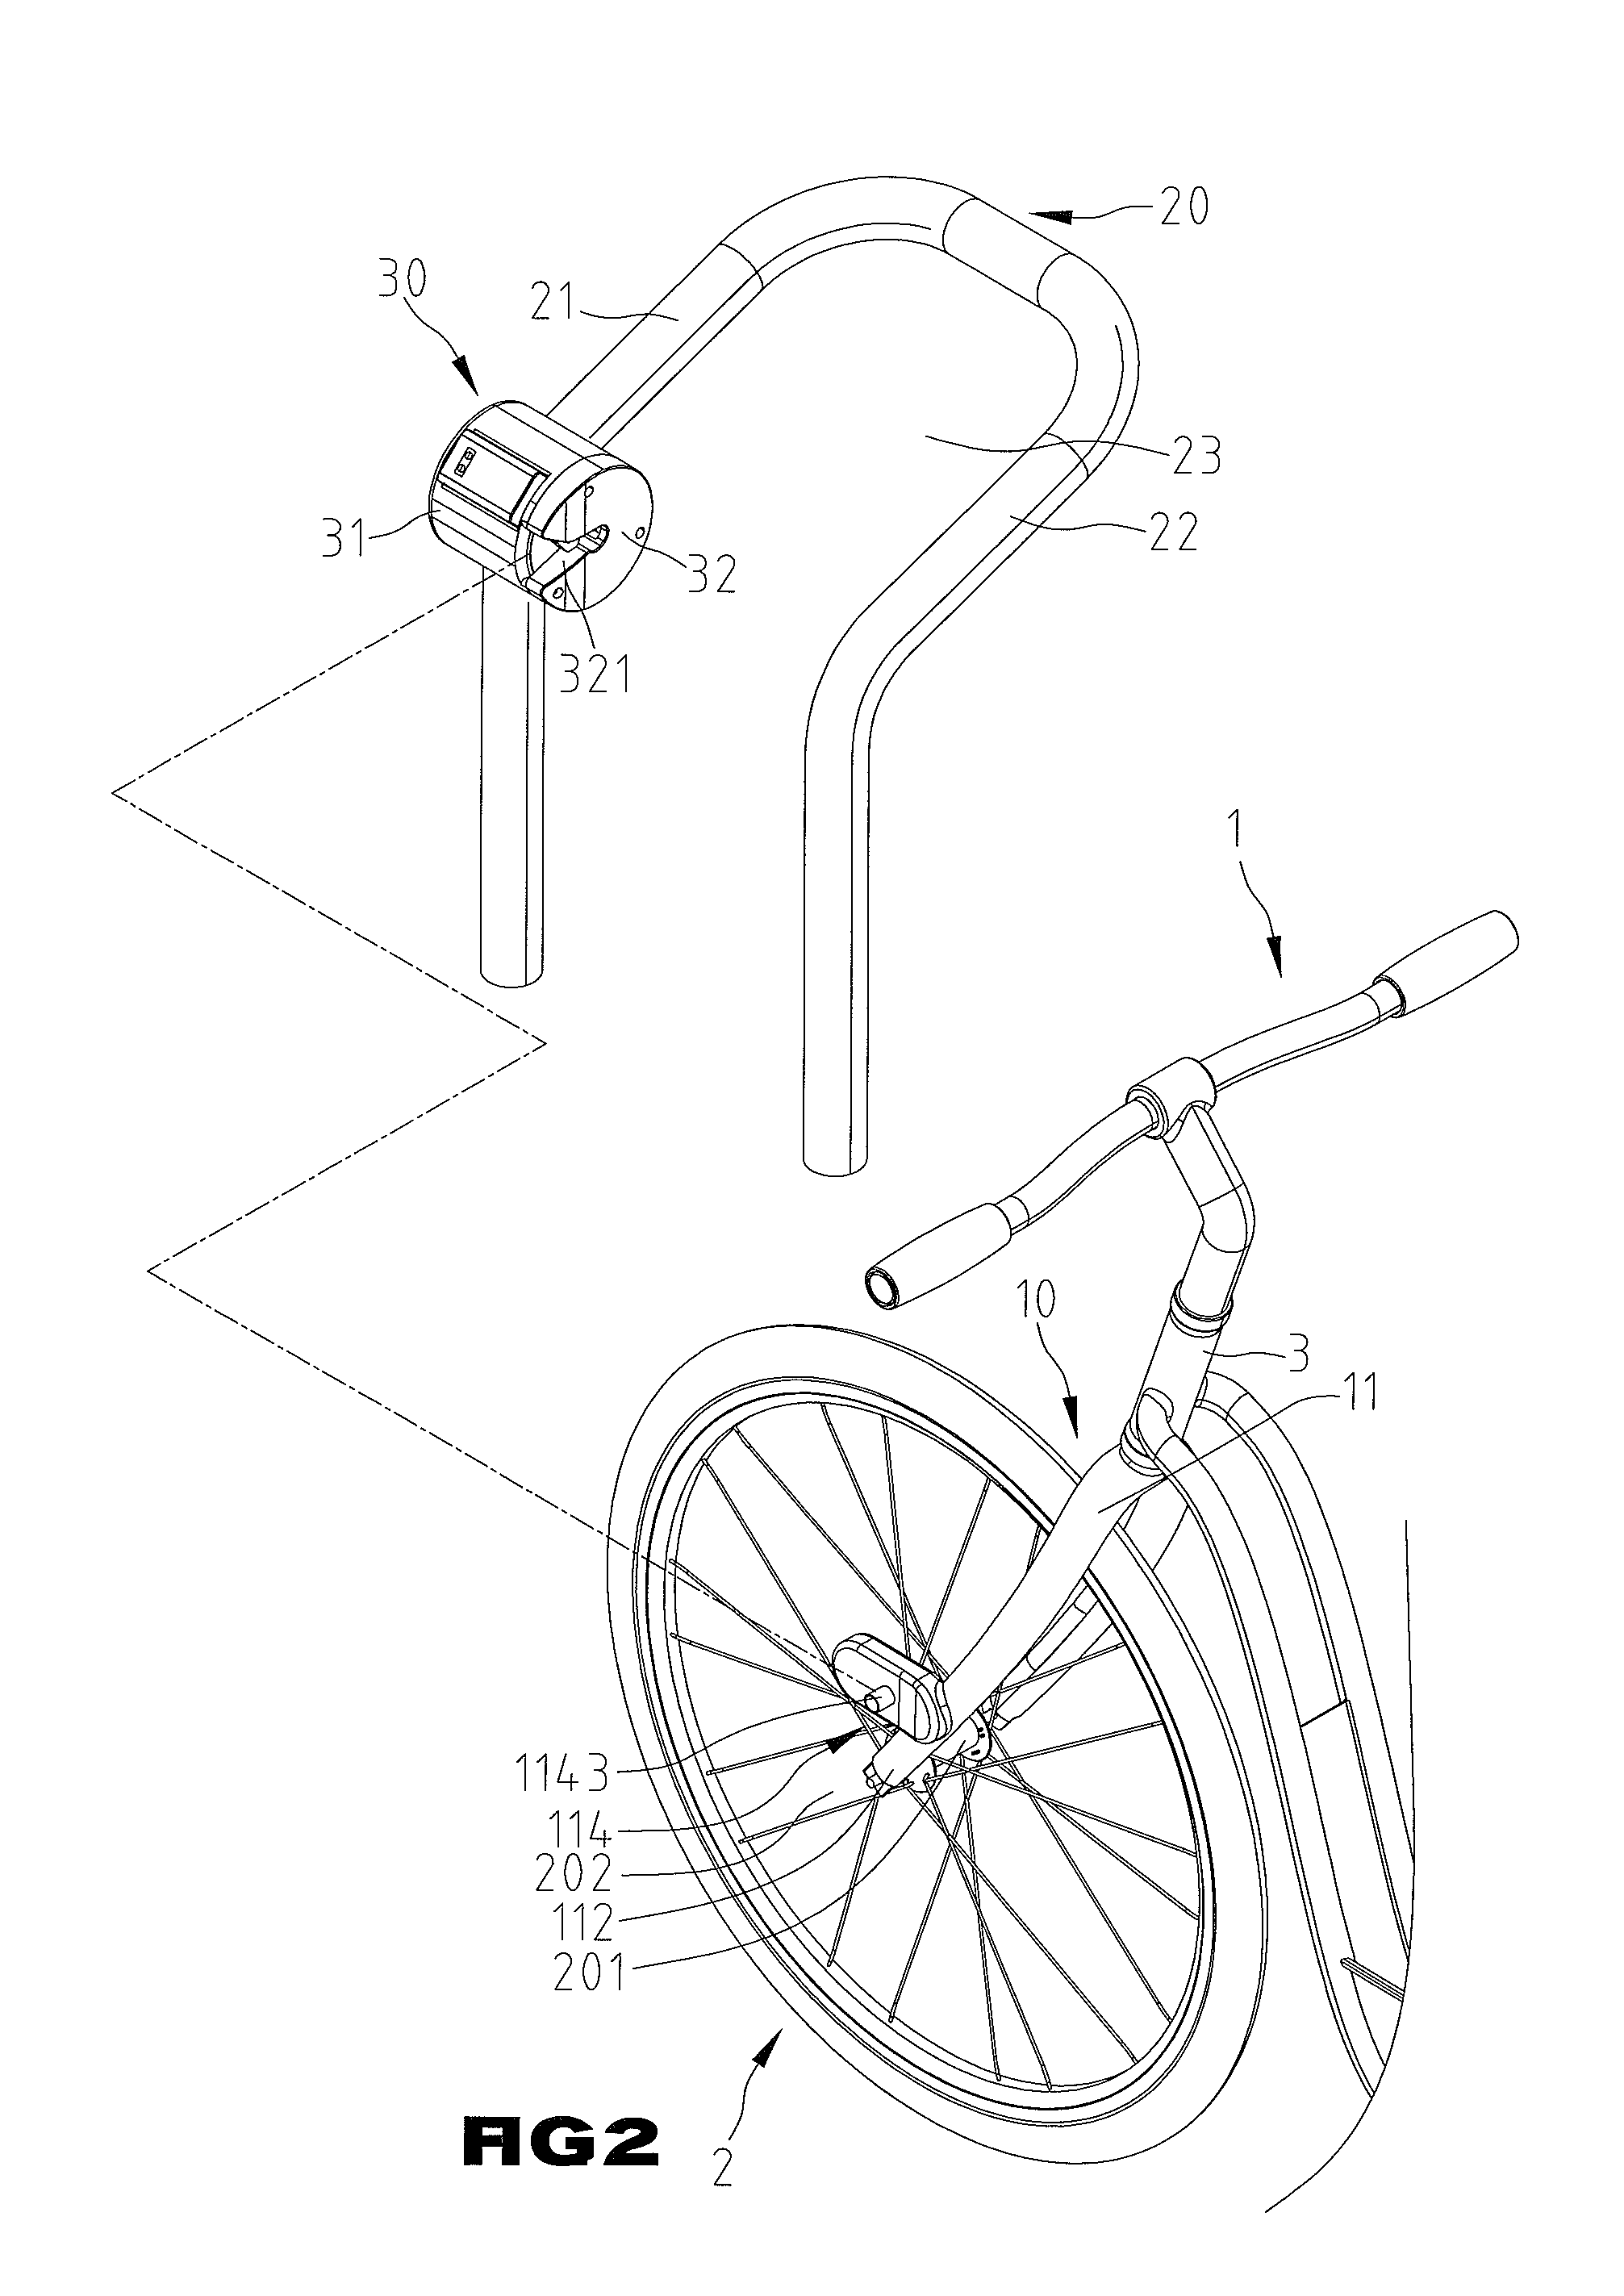 Combination of Fixture Member for Bicycle and Locking Apparatus for Bicycle Parking Rack